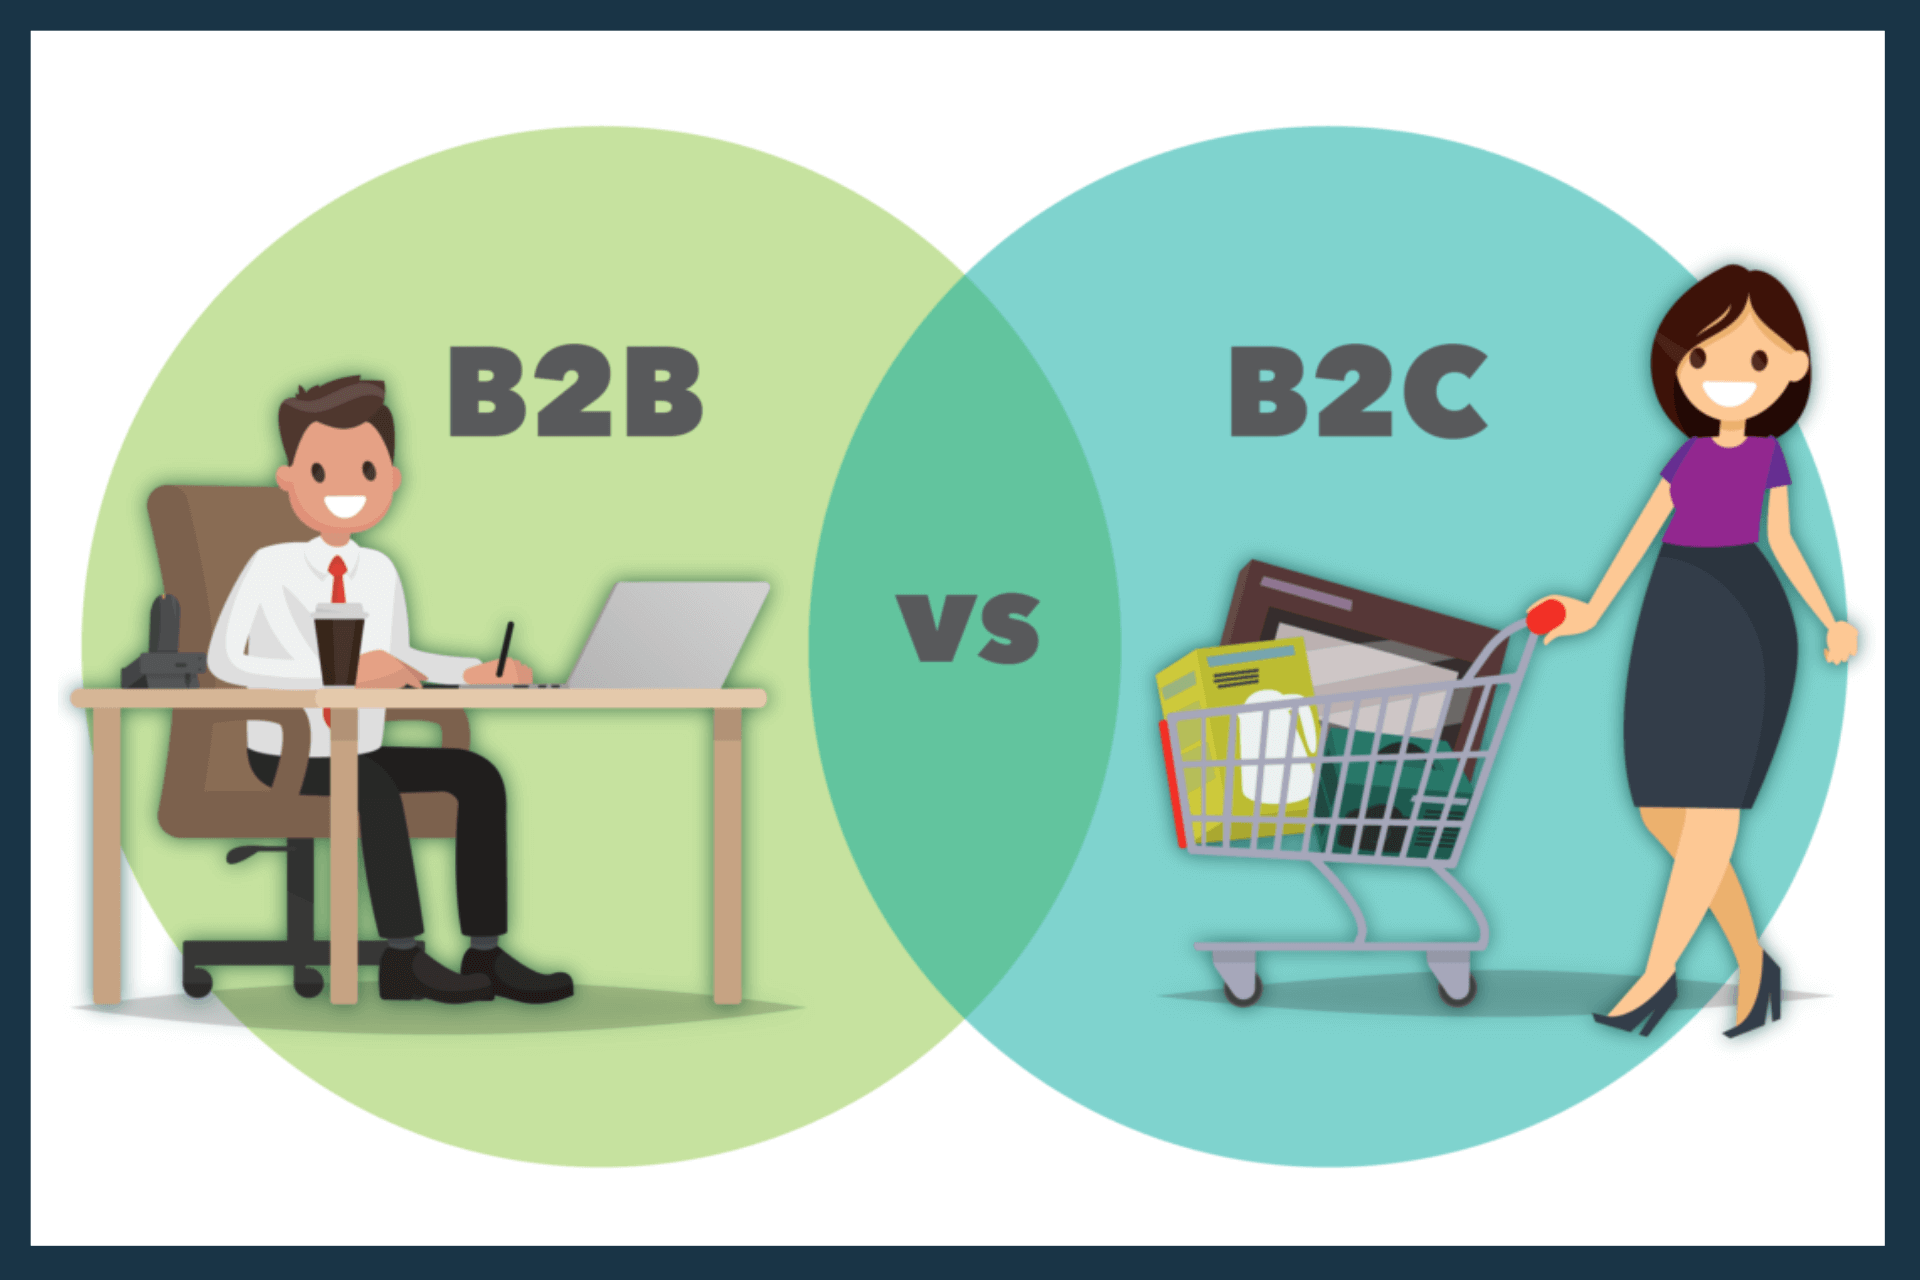 What are the main differences between B2B vs B2C eCommerce?